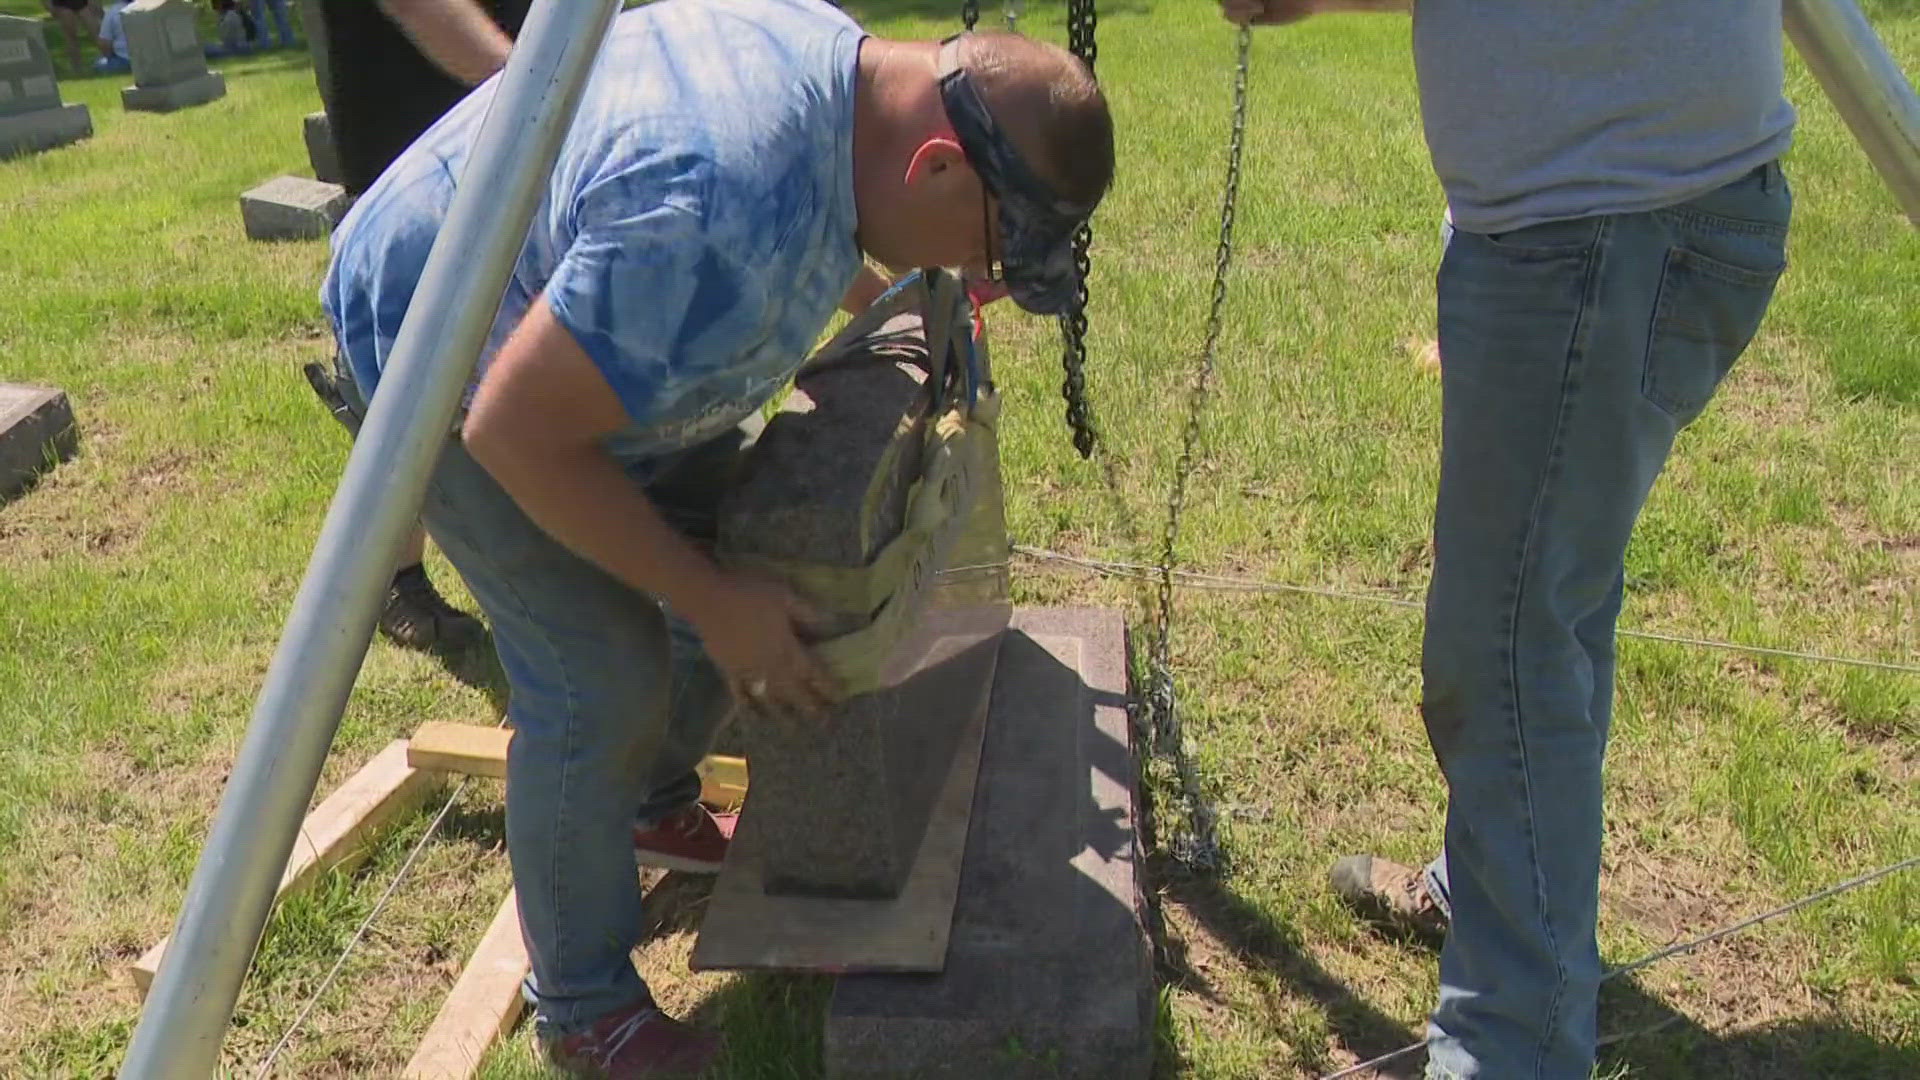 It all started when Kelly Penman Jr. and his brother found the headstone of a distant family member in disrepair and decided to fix it up.